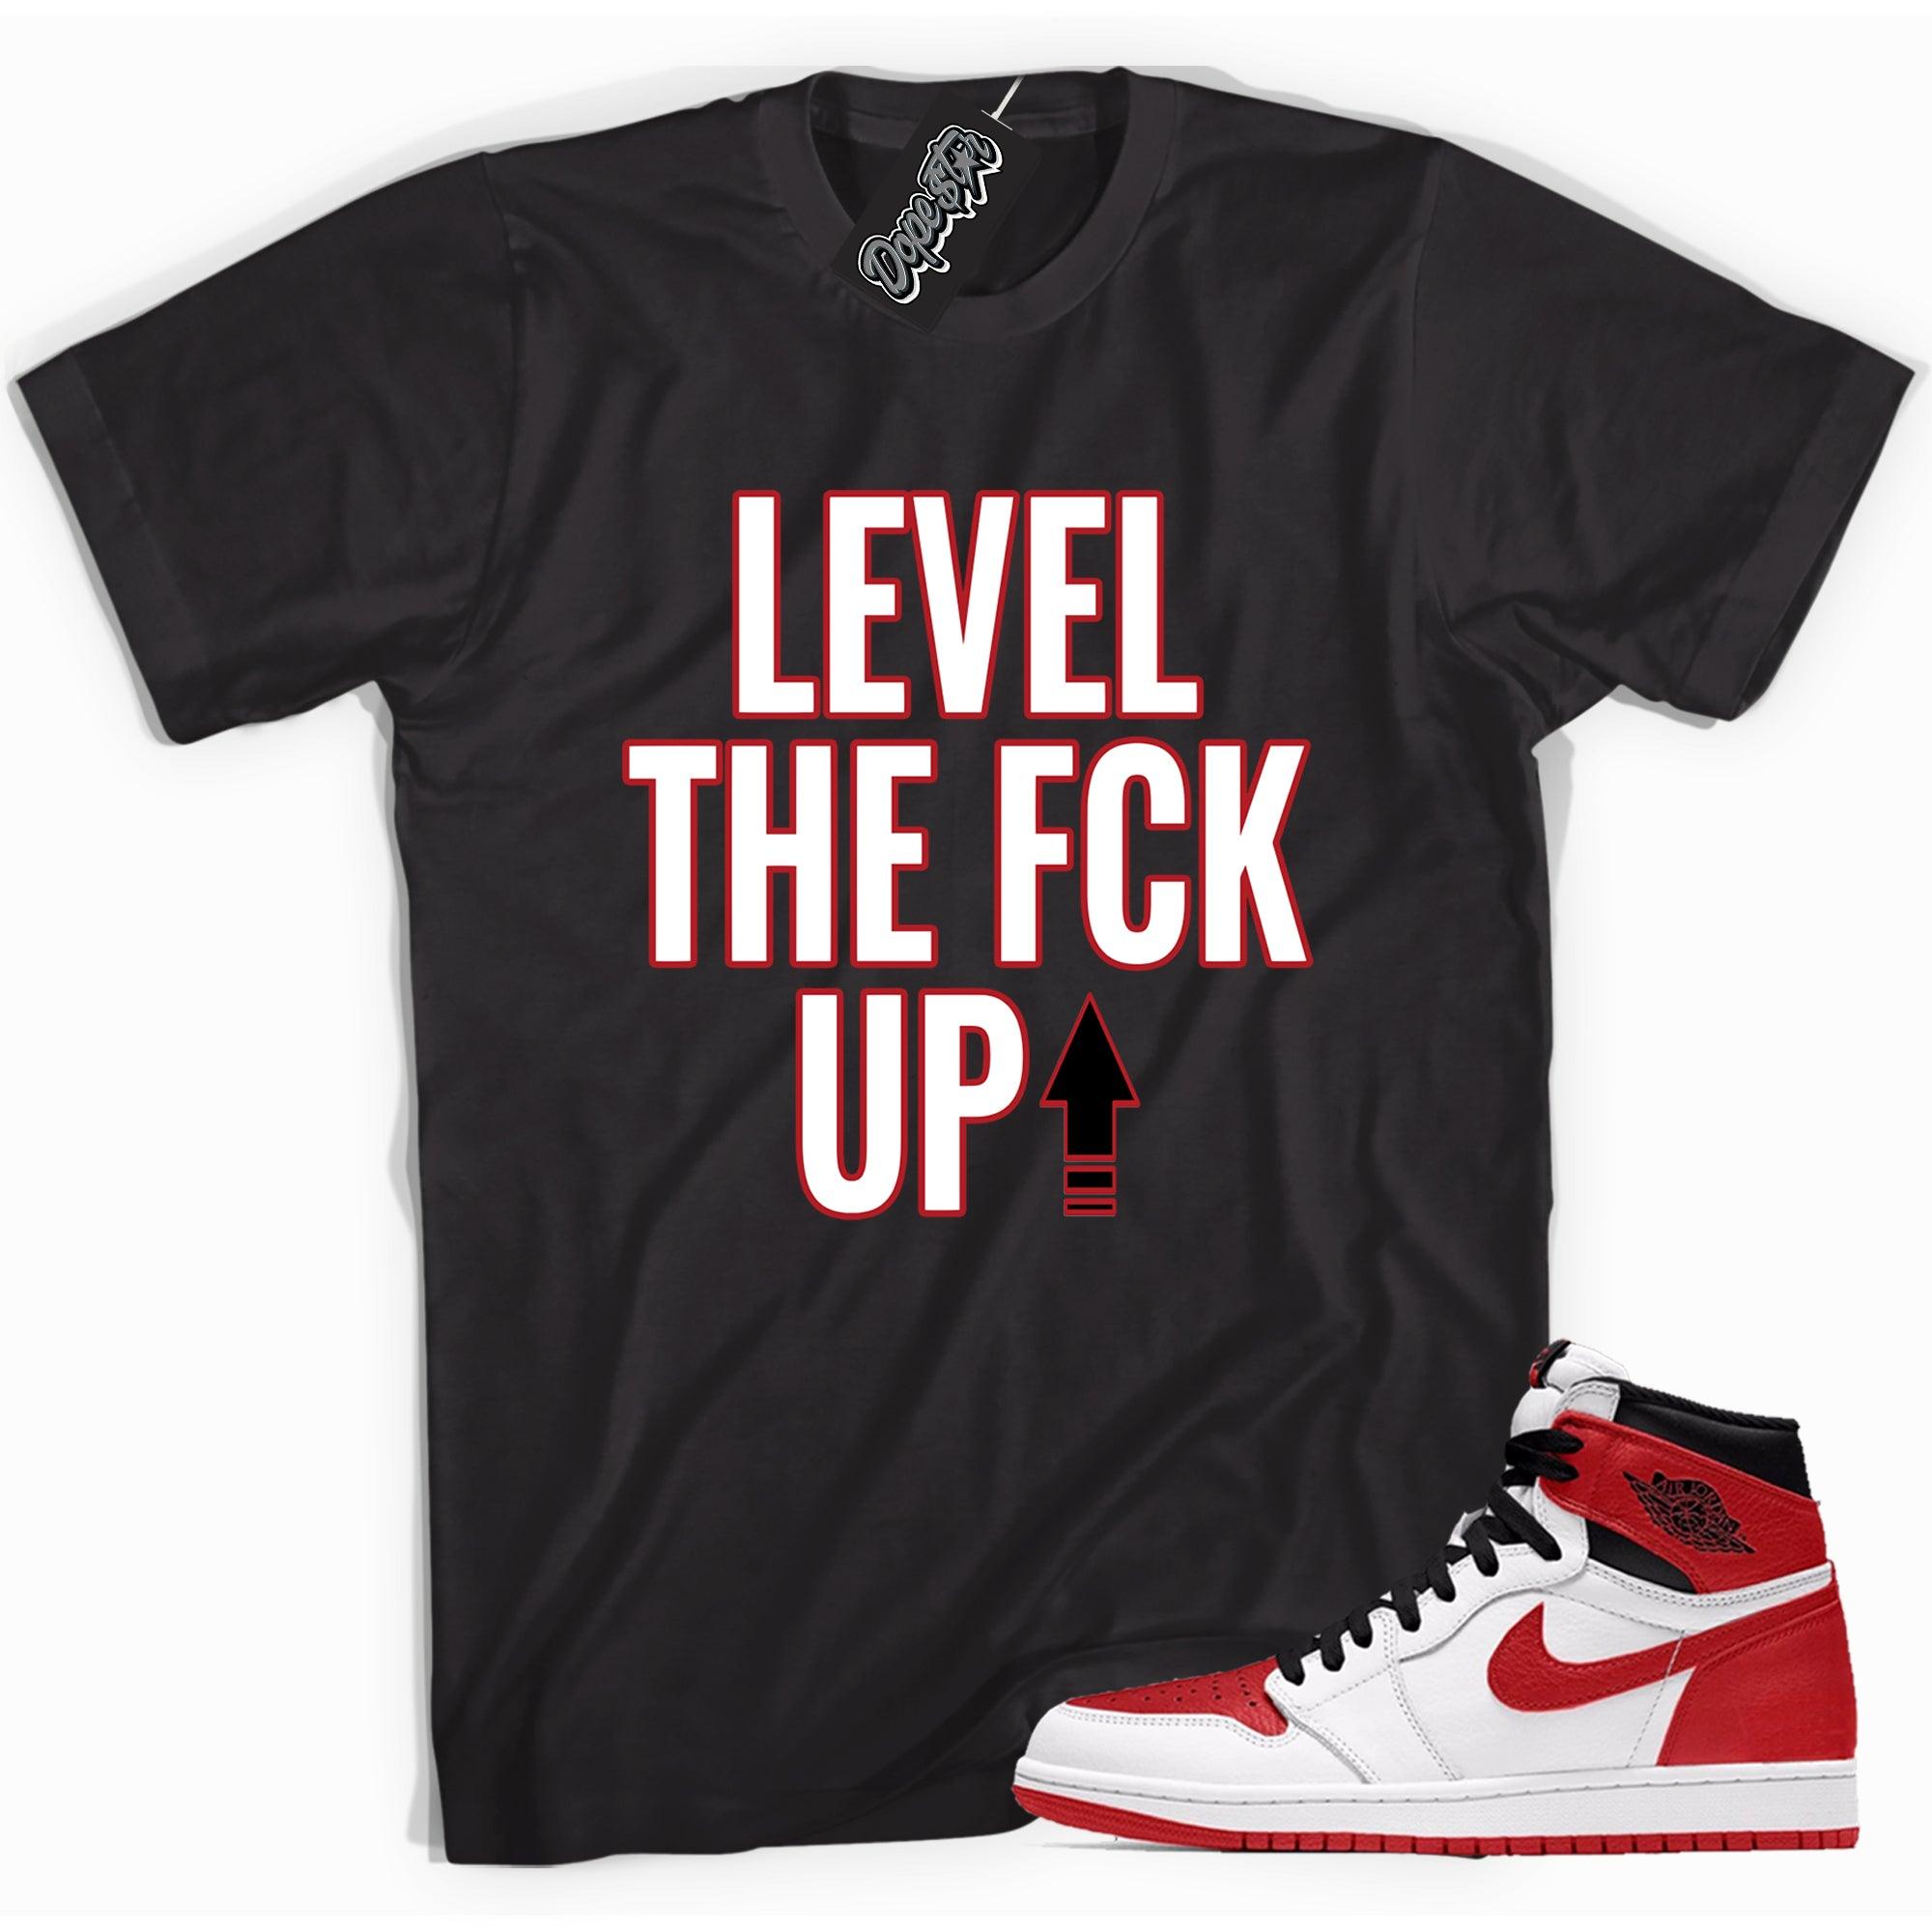 Cool black graphic tee with 'Level Up' print, that perfectly matches Air Jordan 1 Retro High OG Heritage Toe sneakers.